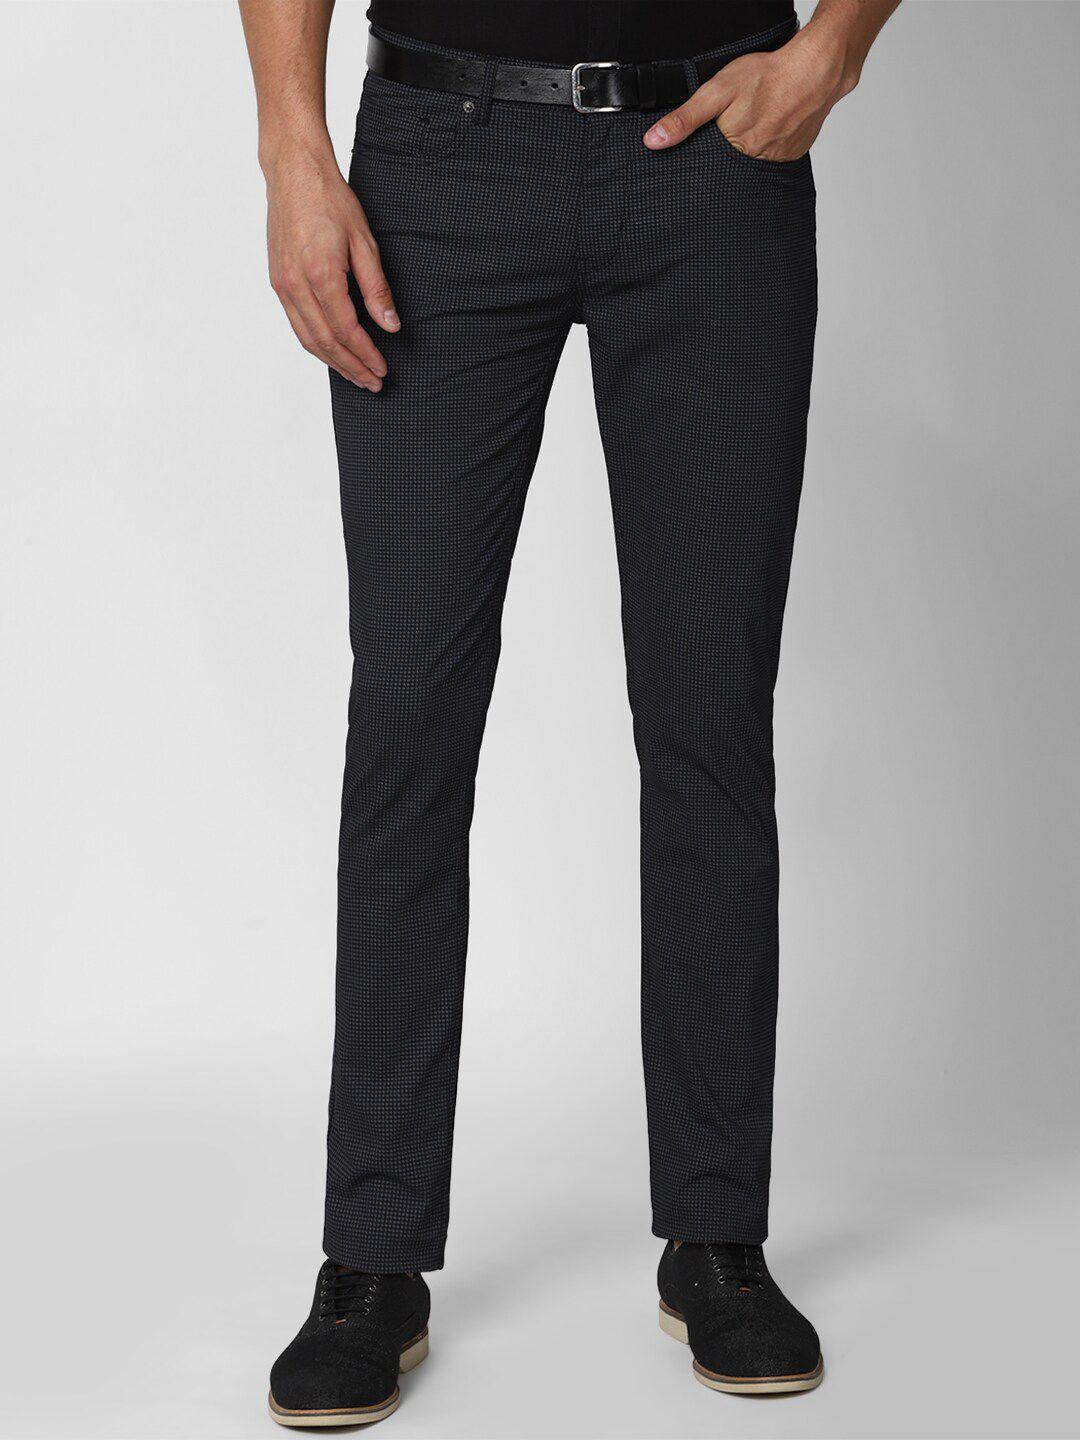 peter england casuals men black printed trousers